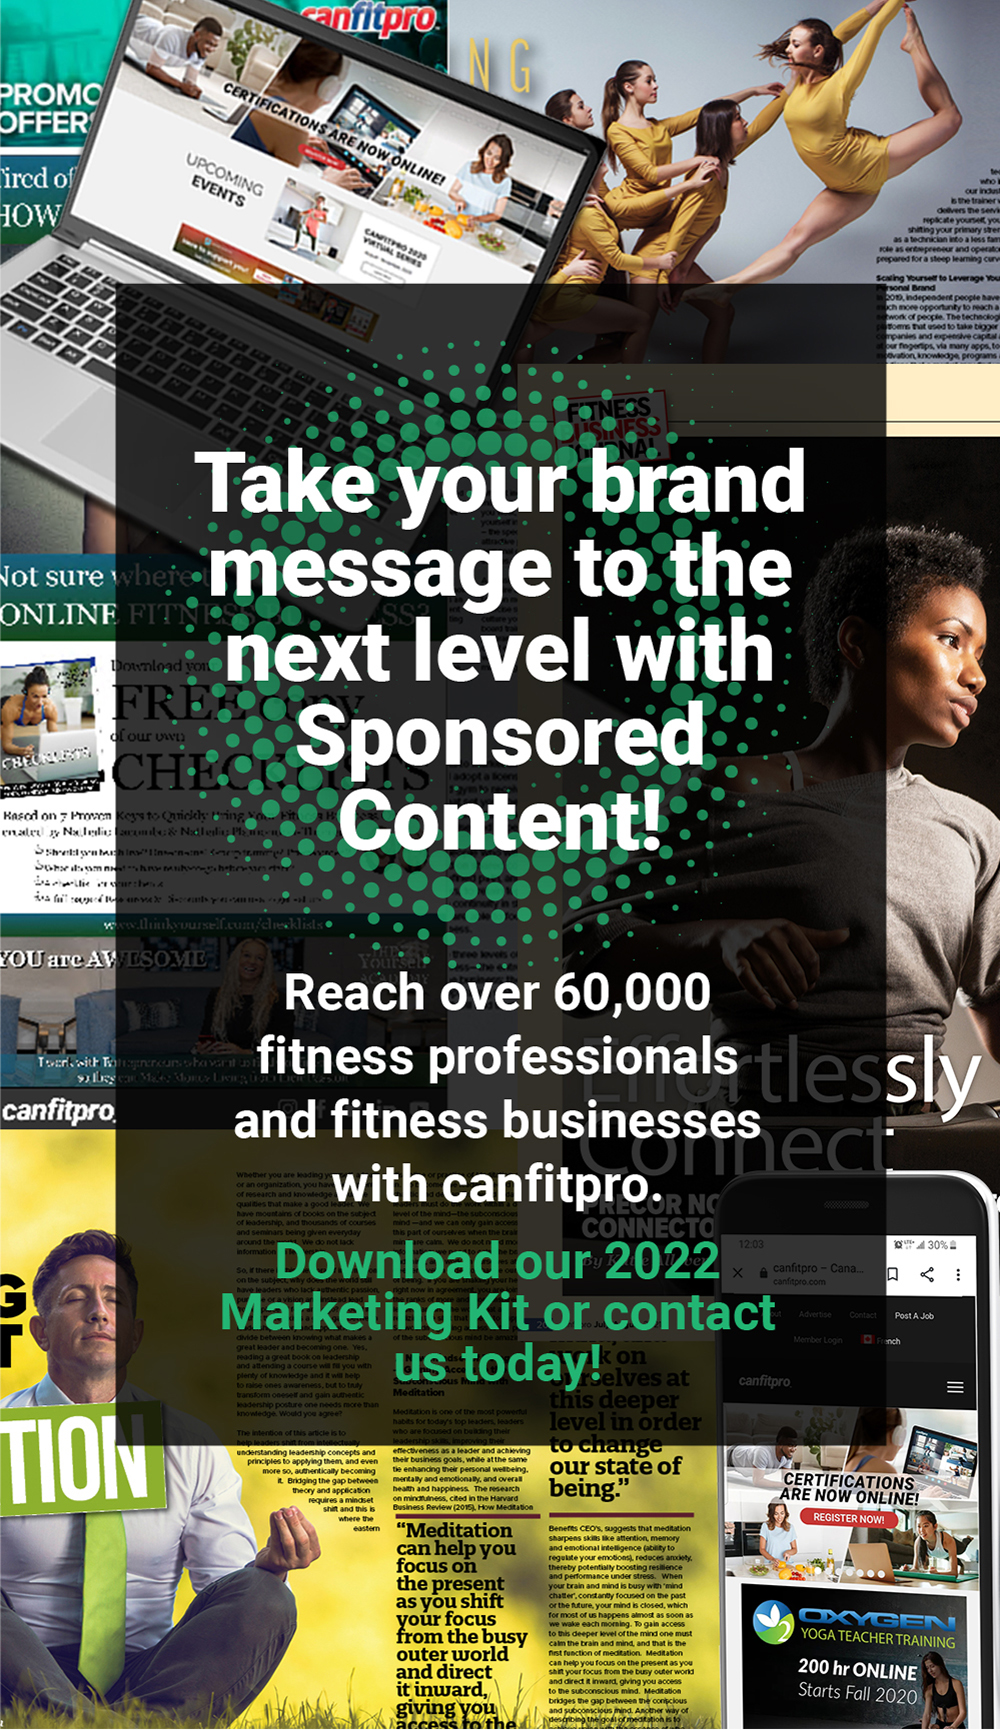 Download our 2022 Marketing Kit or contact us today